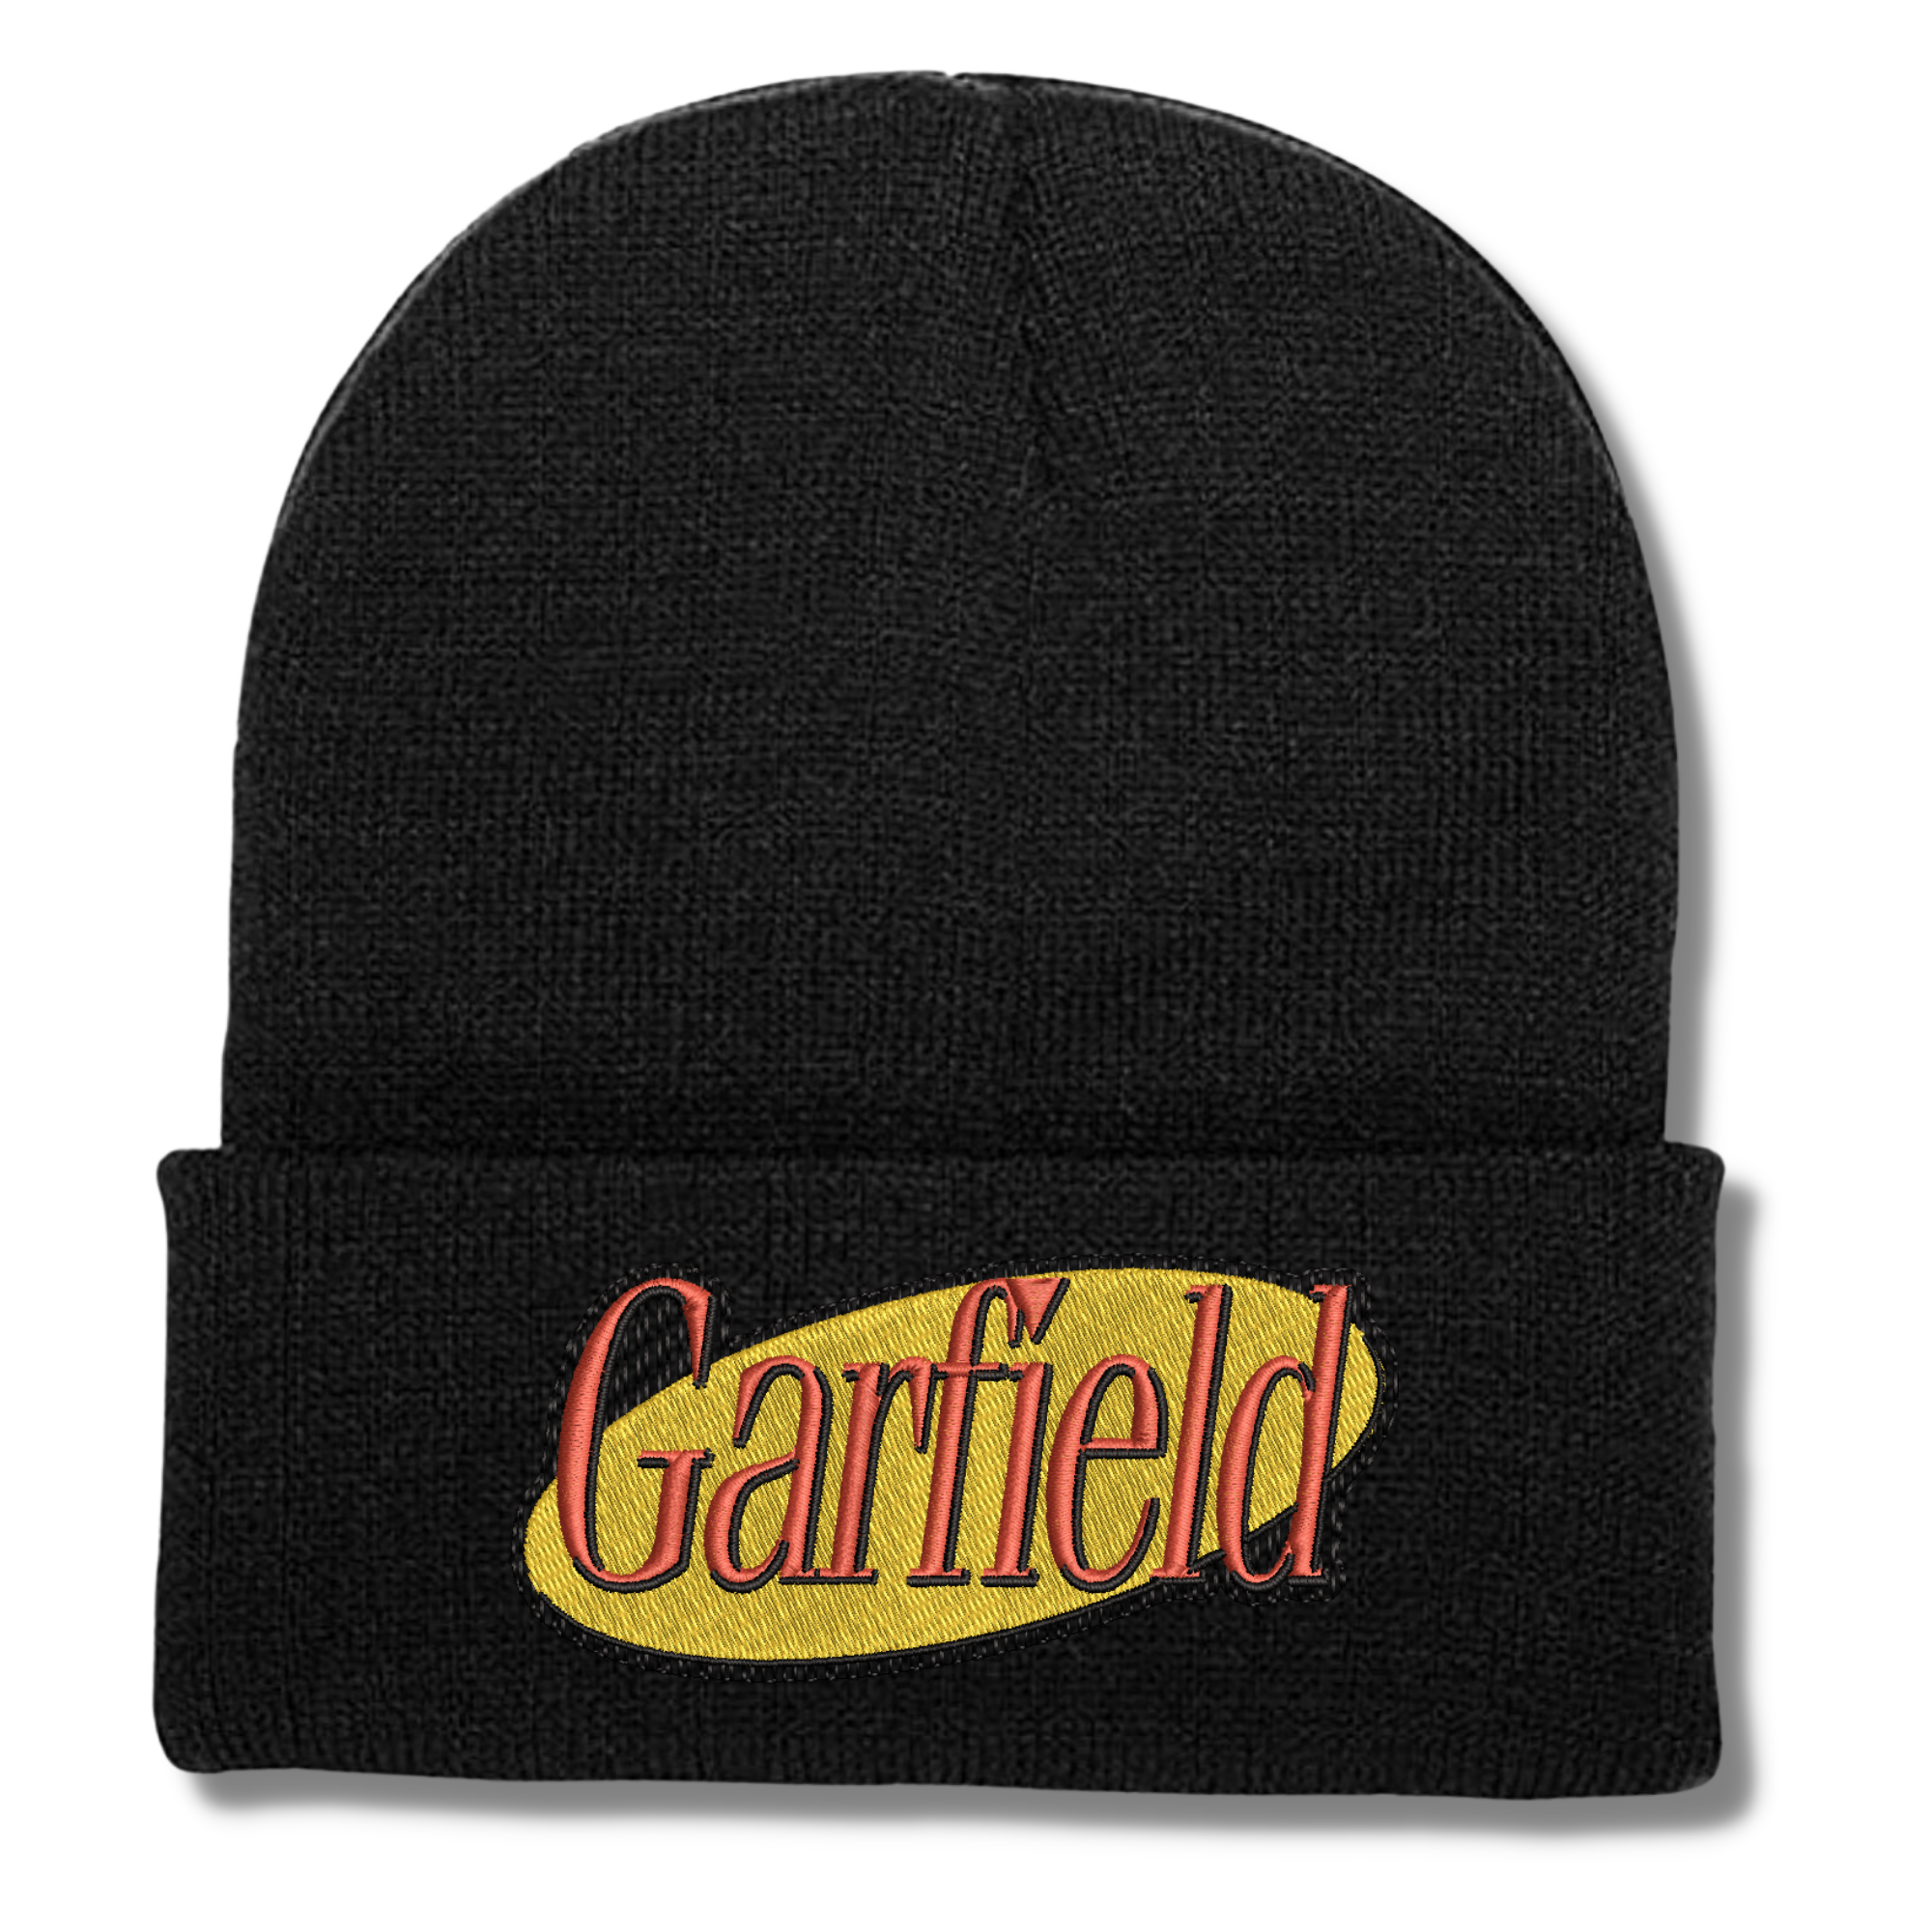 Garfield Seinfeld Crossover Episode Embroidered Beanie Hat, One Size Fits All